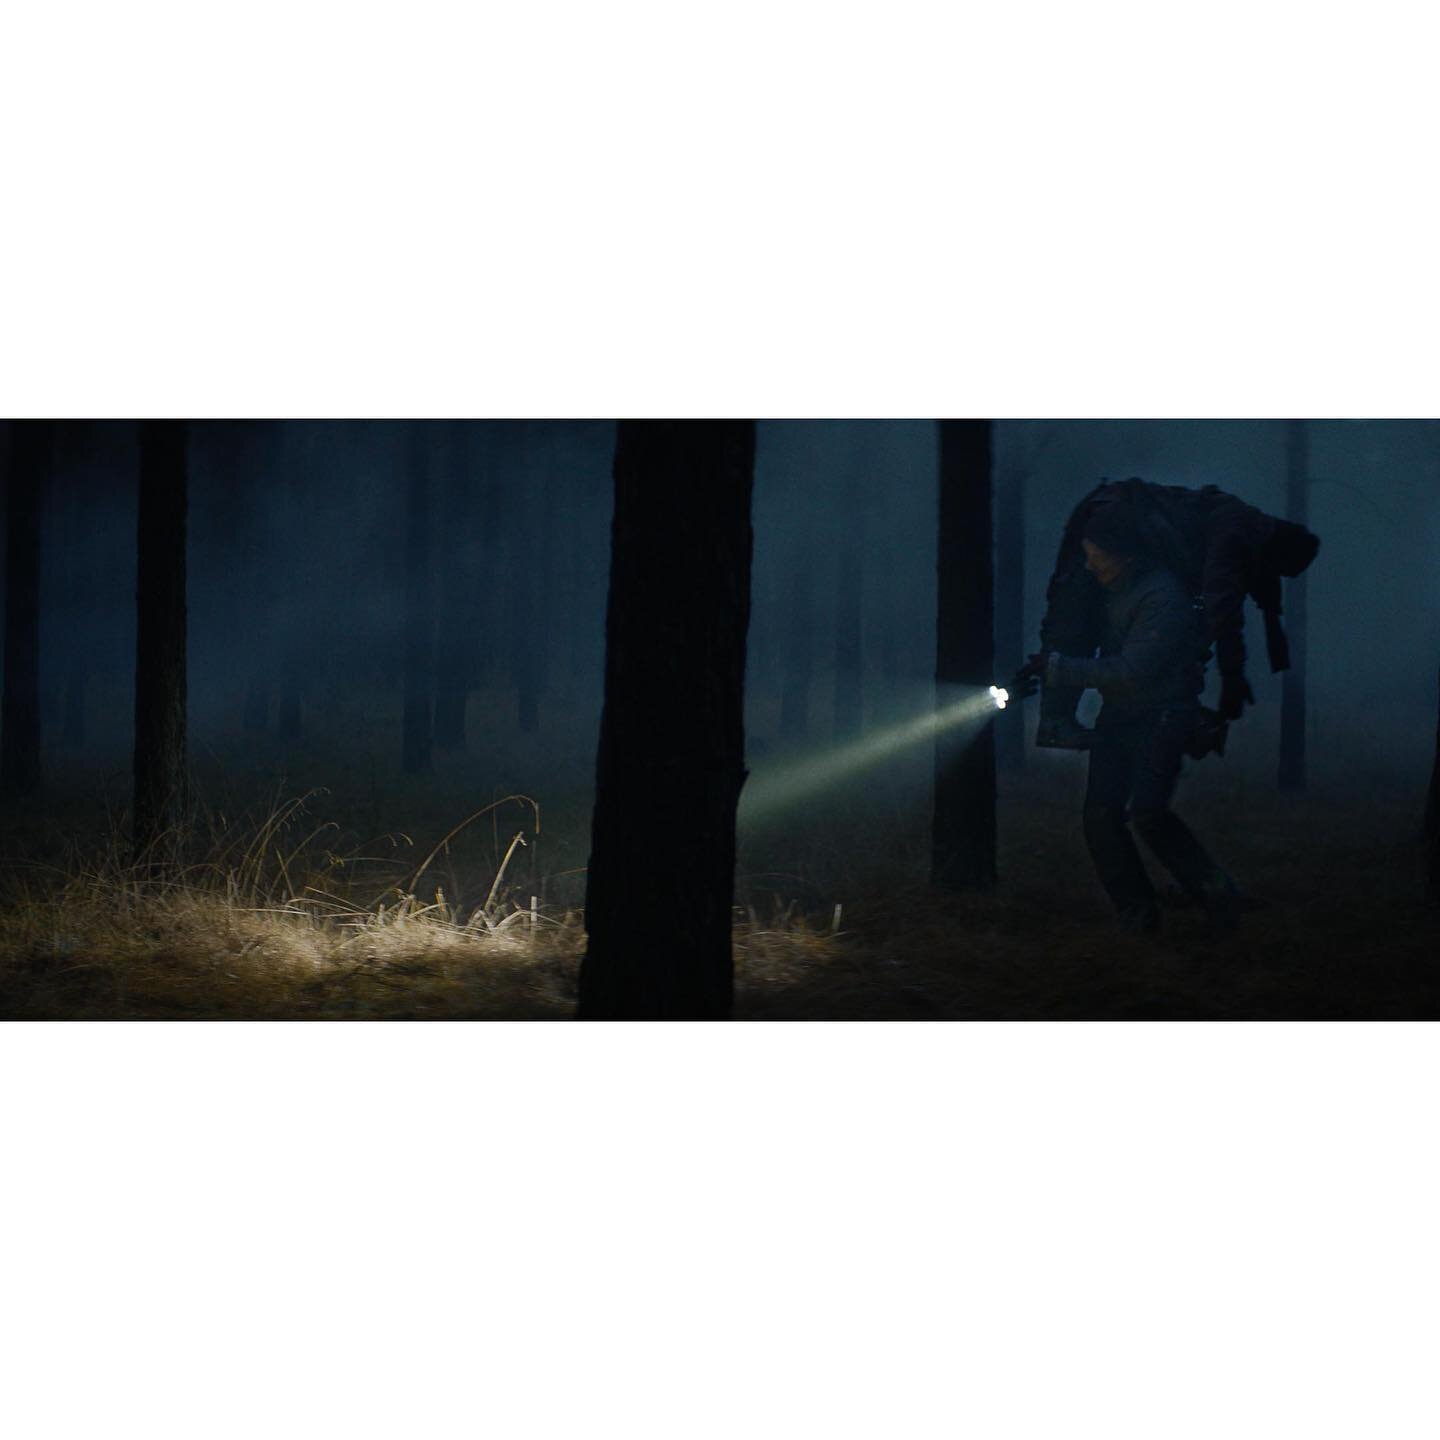 Some unused frames of FREMDE.
.
Link in bio for used ones 🎥🎞
.
directed by @tim_duenschede 
produced by @friendship_films .
#directorofphotography #cinematography #arri #alexamini #hawkanamorphic #v-lite #atmosphere